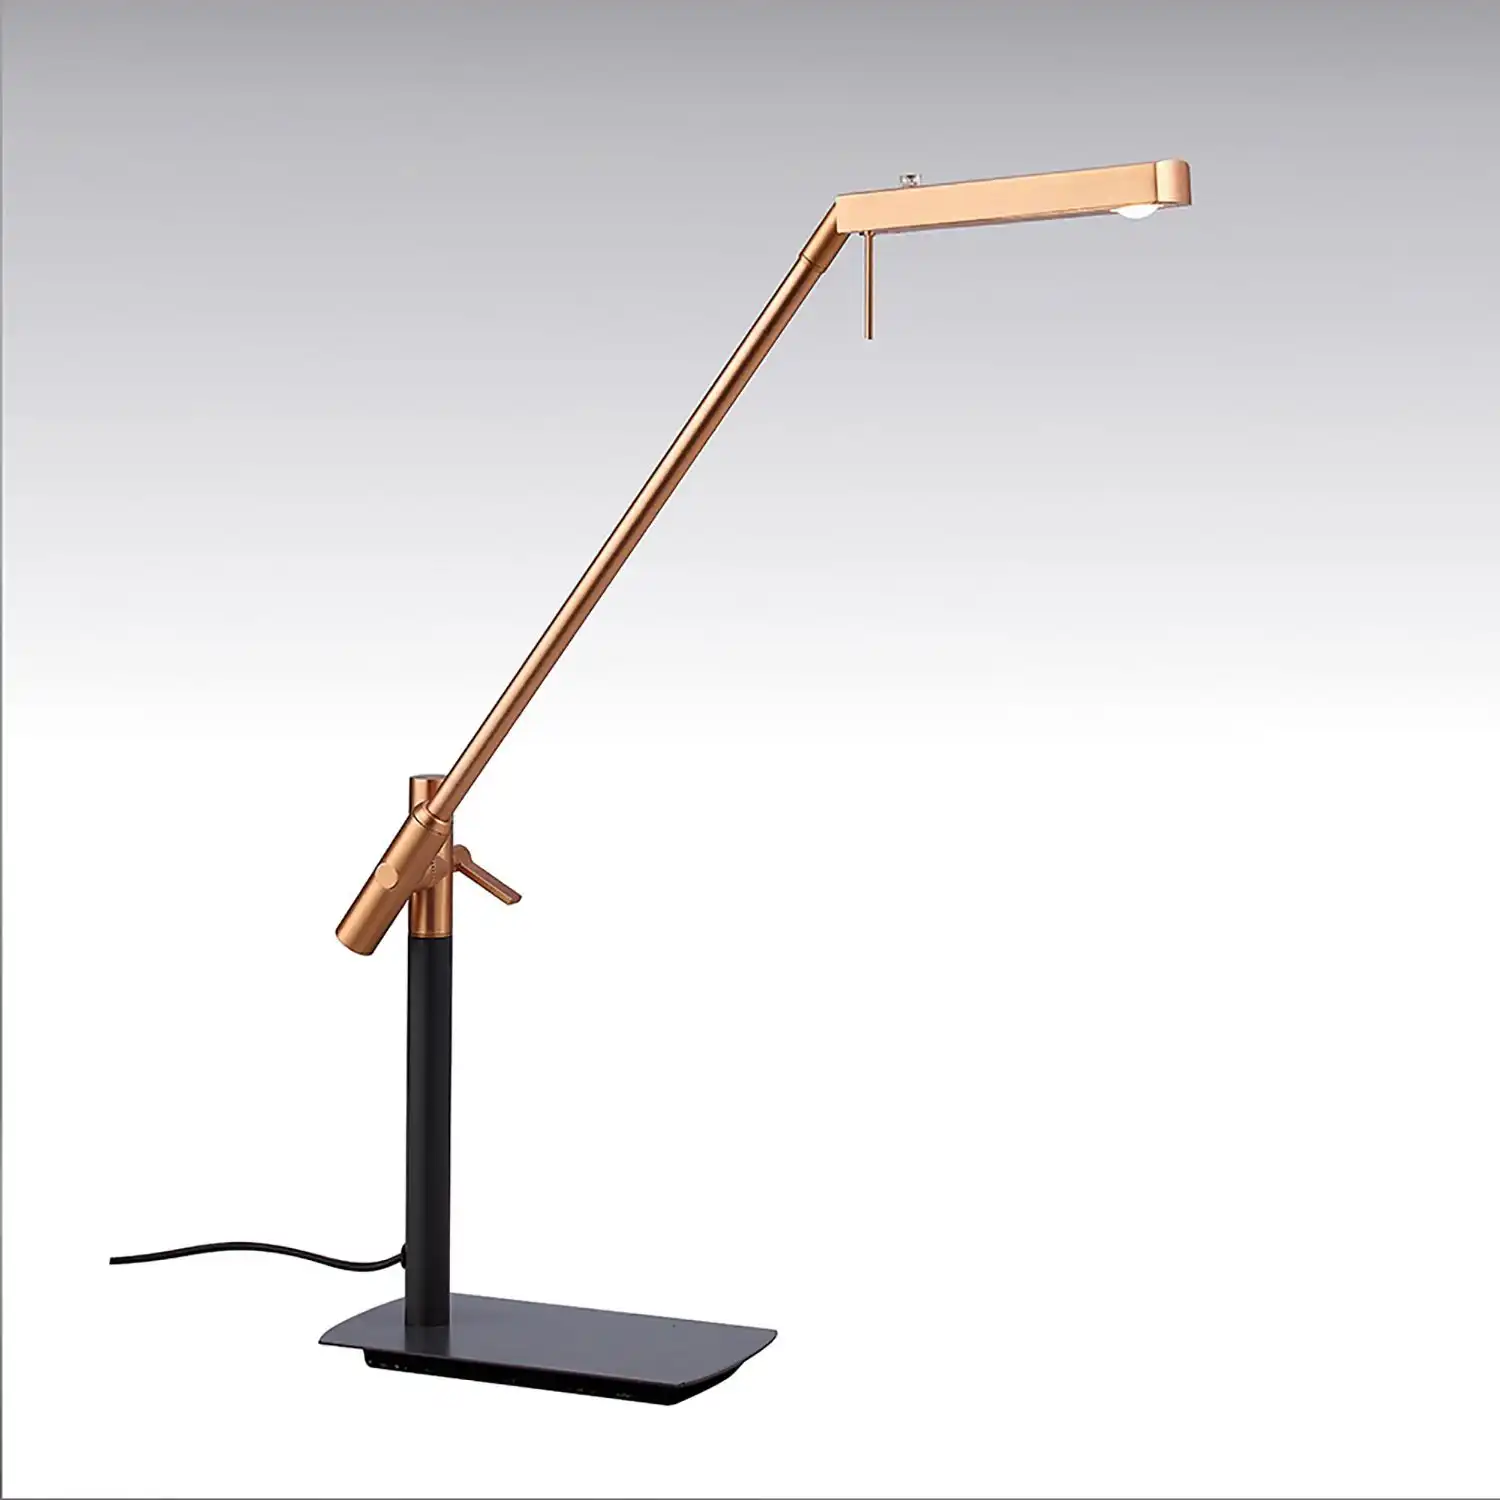 Phuket Table Lamp 1 Light 7W LED 3000K, 600lm, Touch Dimmer, Copper Anthracite, 3yrs Warranty